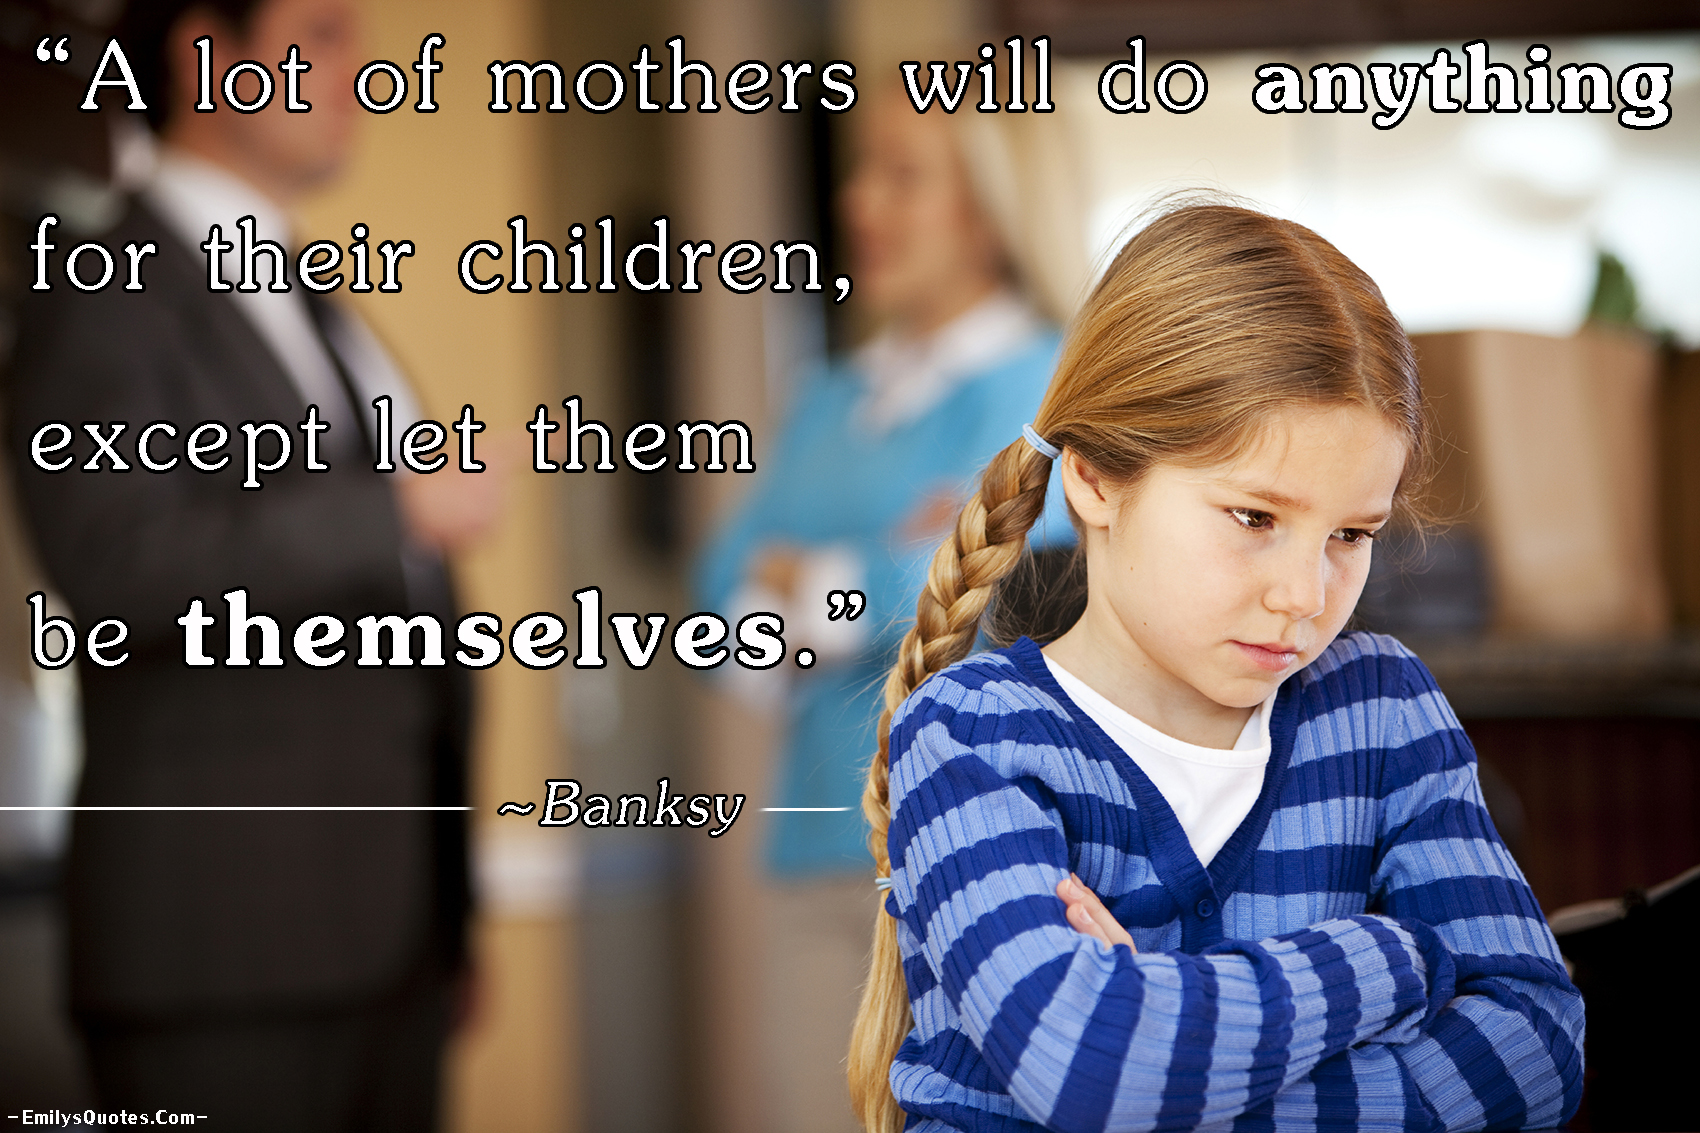 A lot of mothers will do anything for their children, except let them be themselves